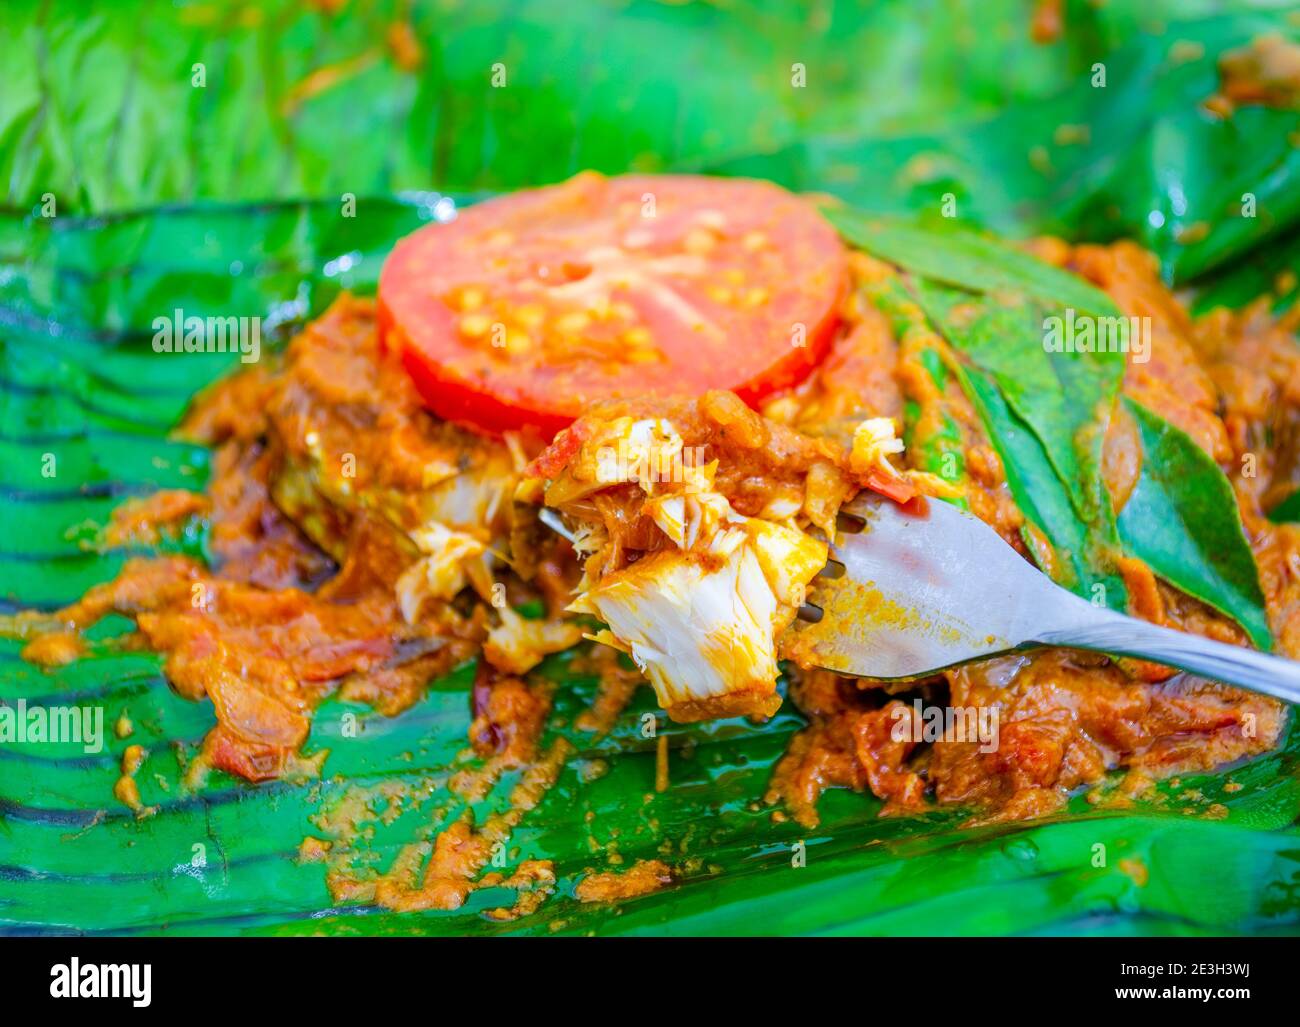 Closeup of banana leaf fried fish taken on a fork to be eaten. A true Kerala style preparation, this spicy meen pollichathu. Stock Photo